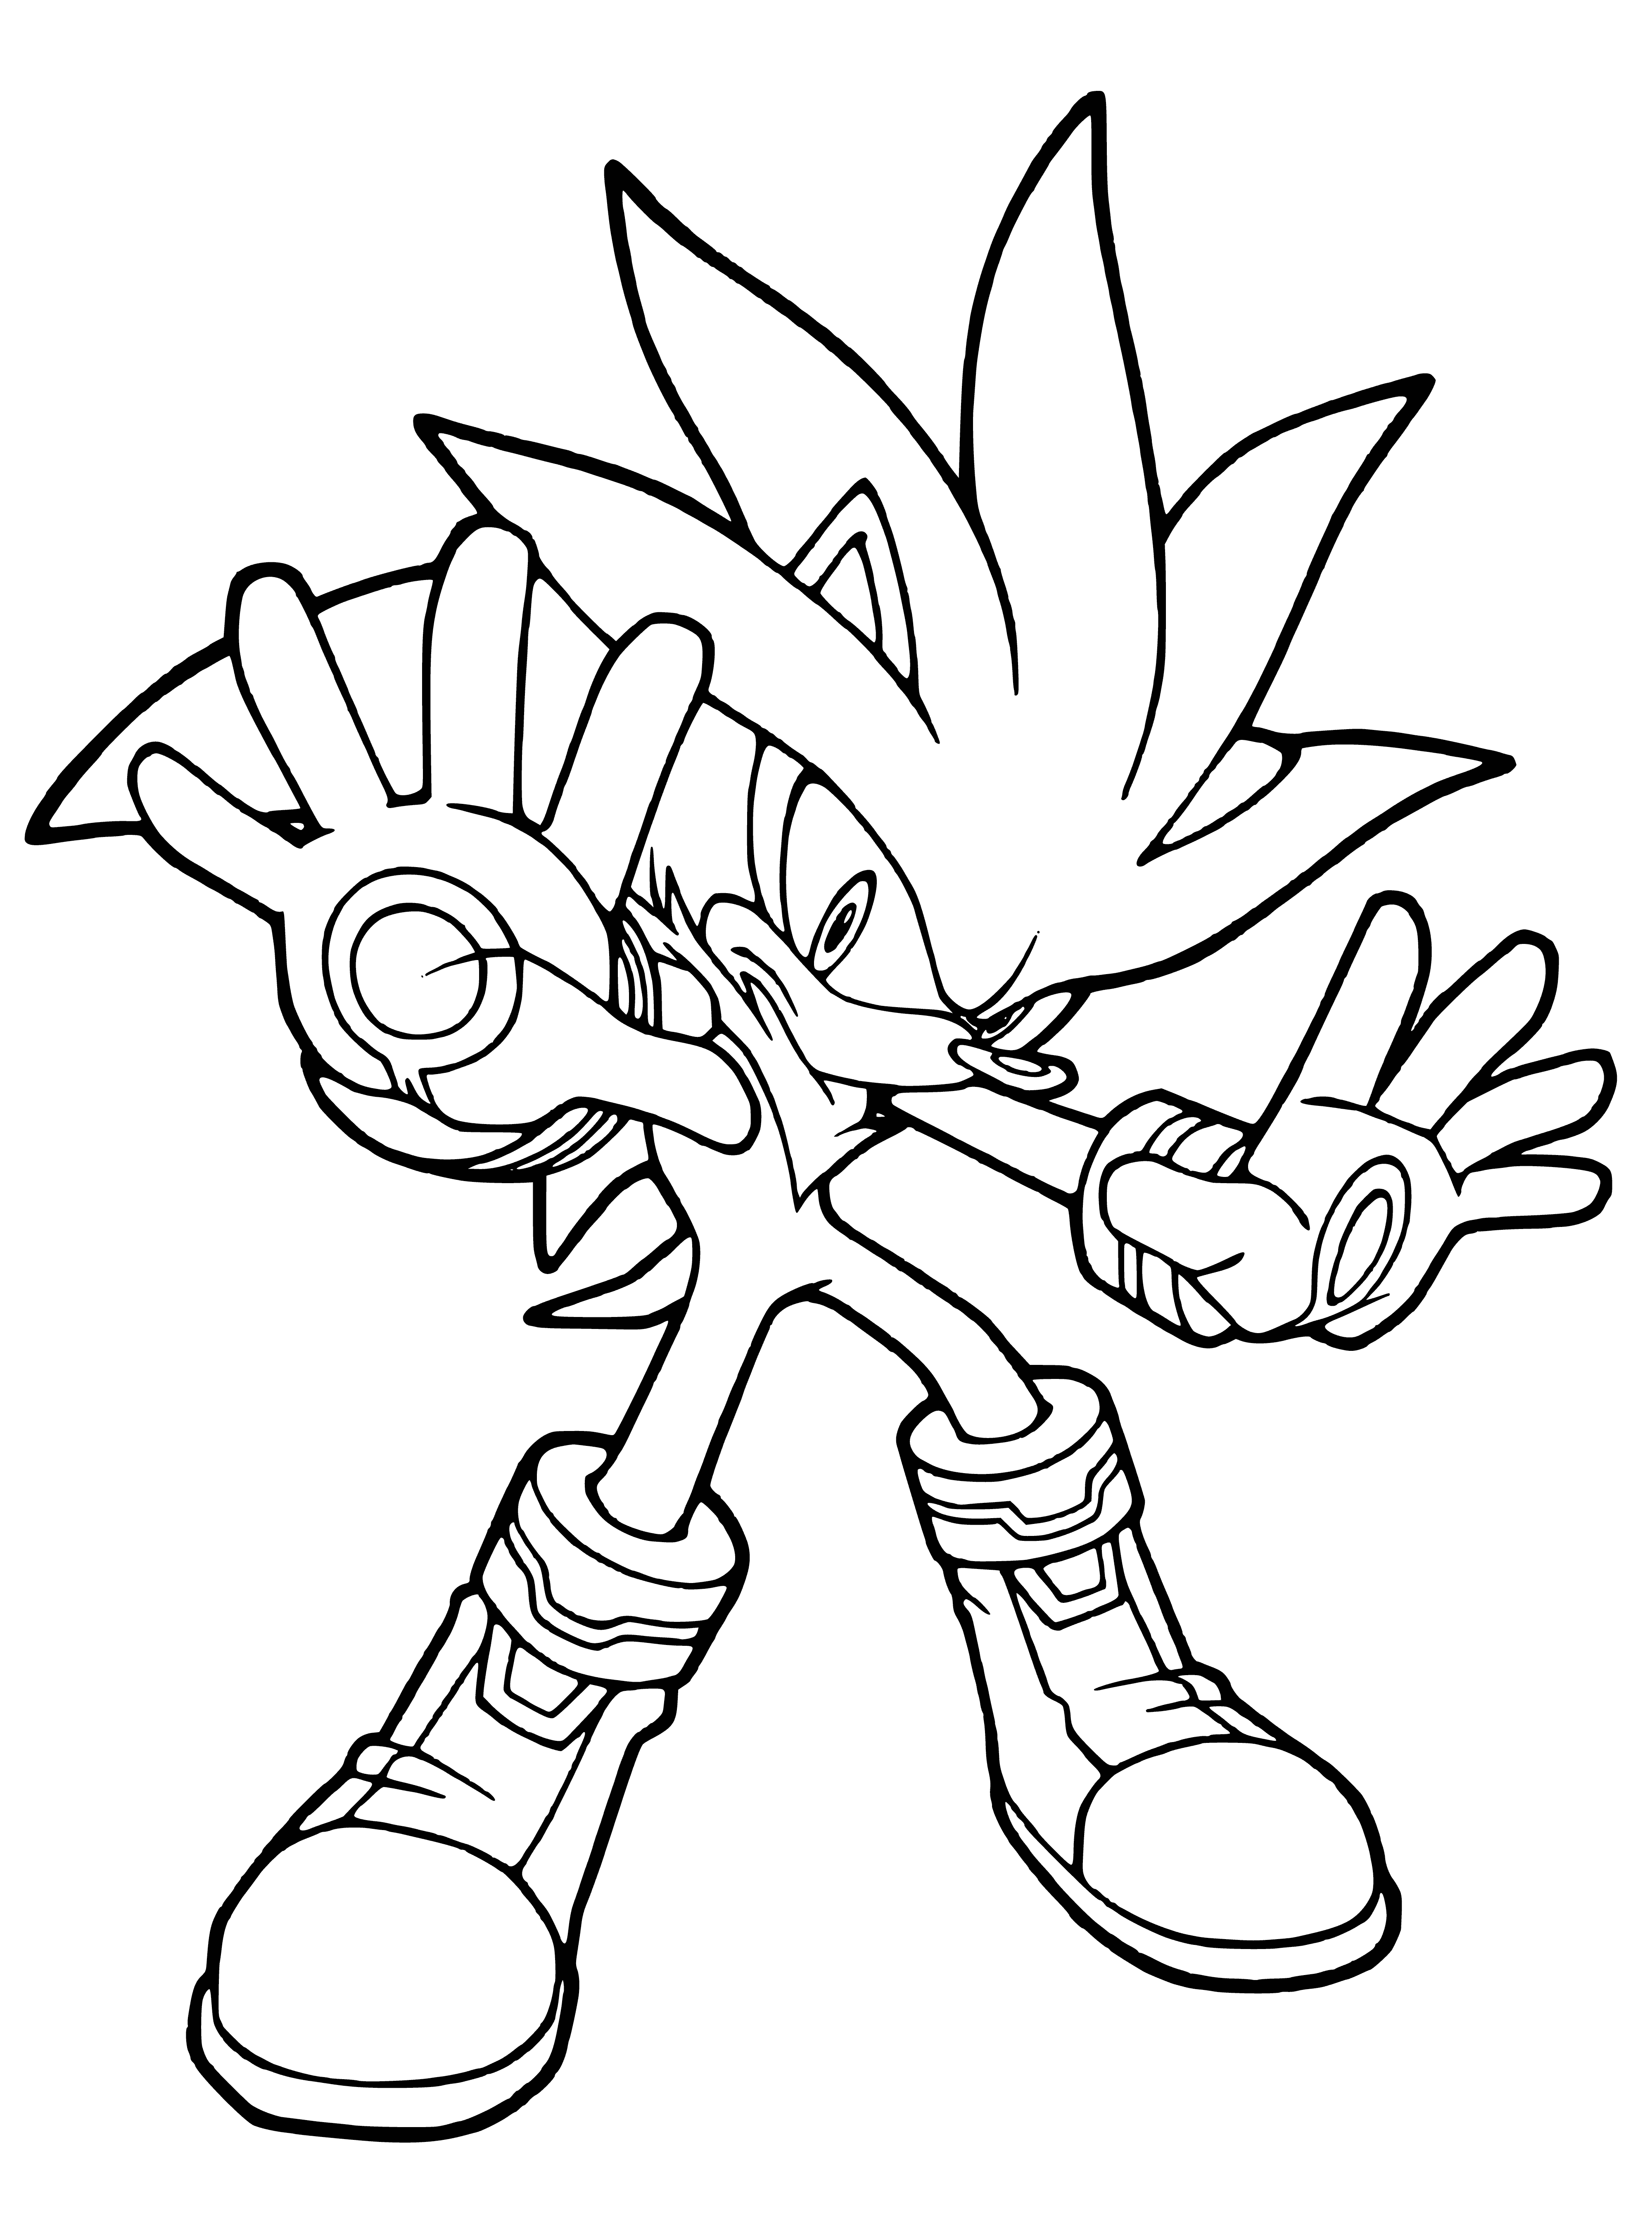 coloring page: Sonic X- Silver is a white hedgehog with red eyes who can control time and space, first appearing in Sonic the Hedgehog (2006).